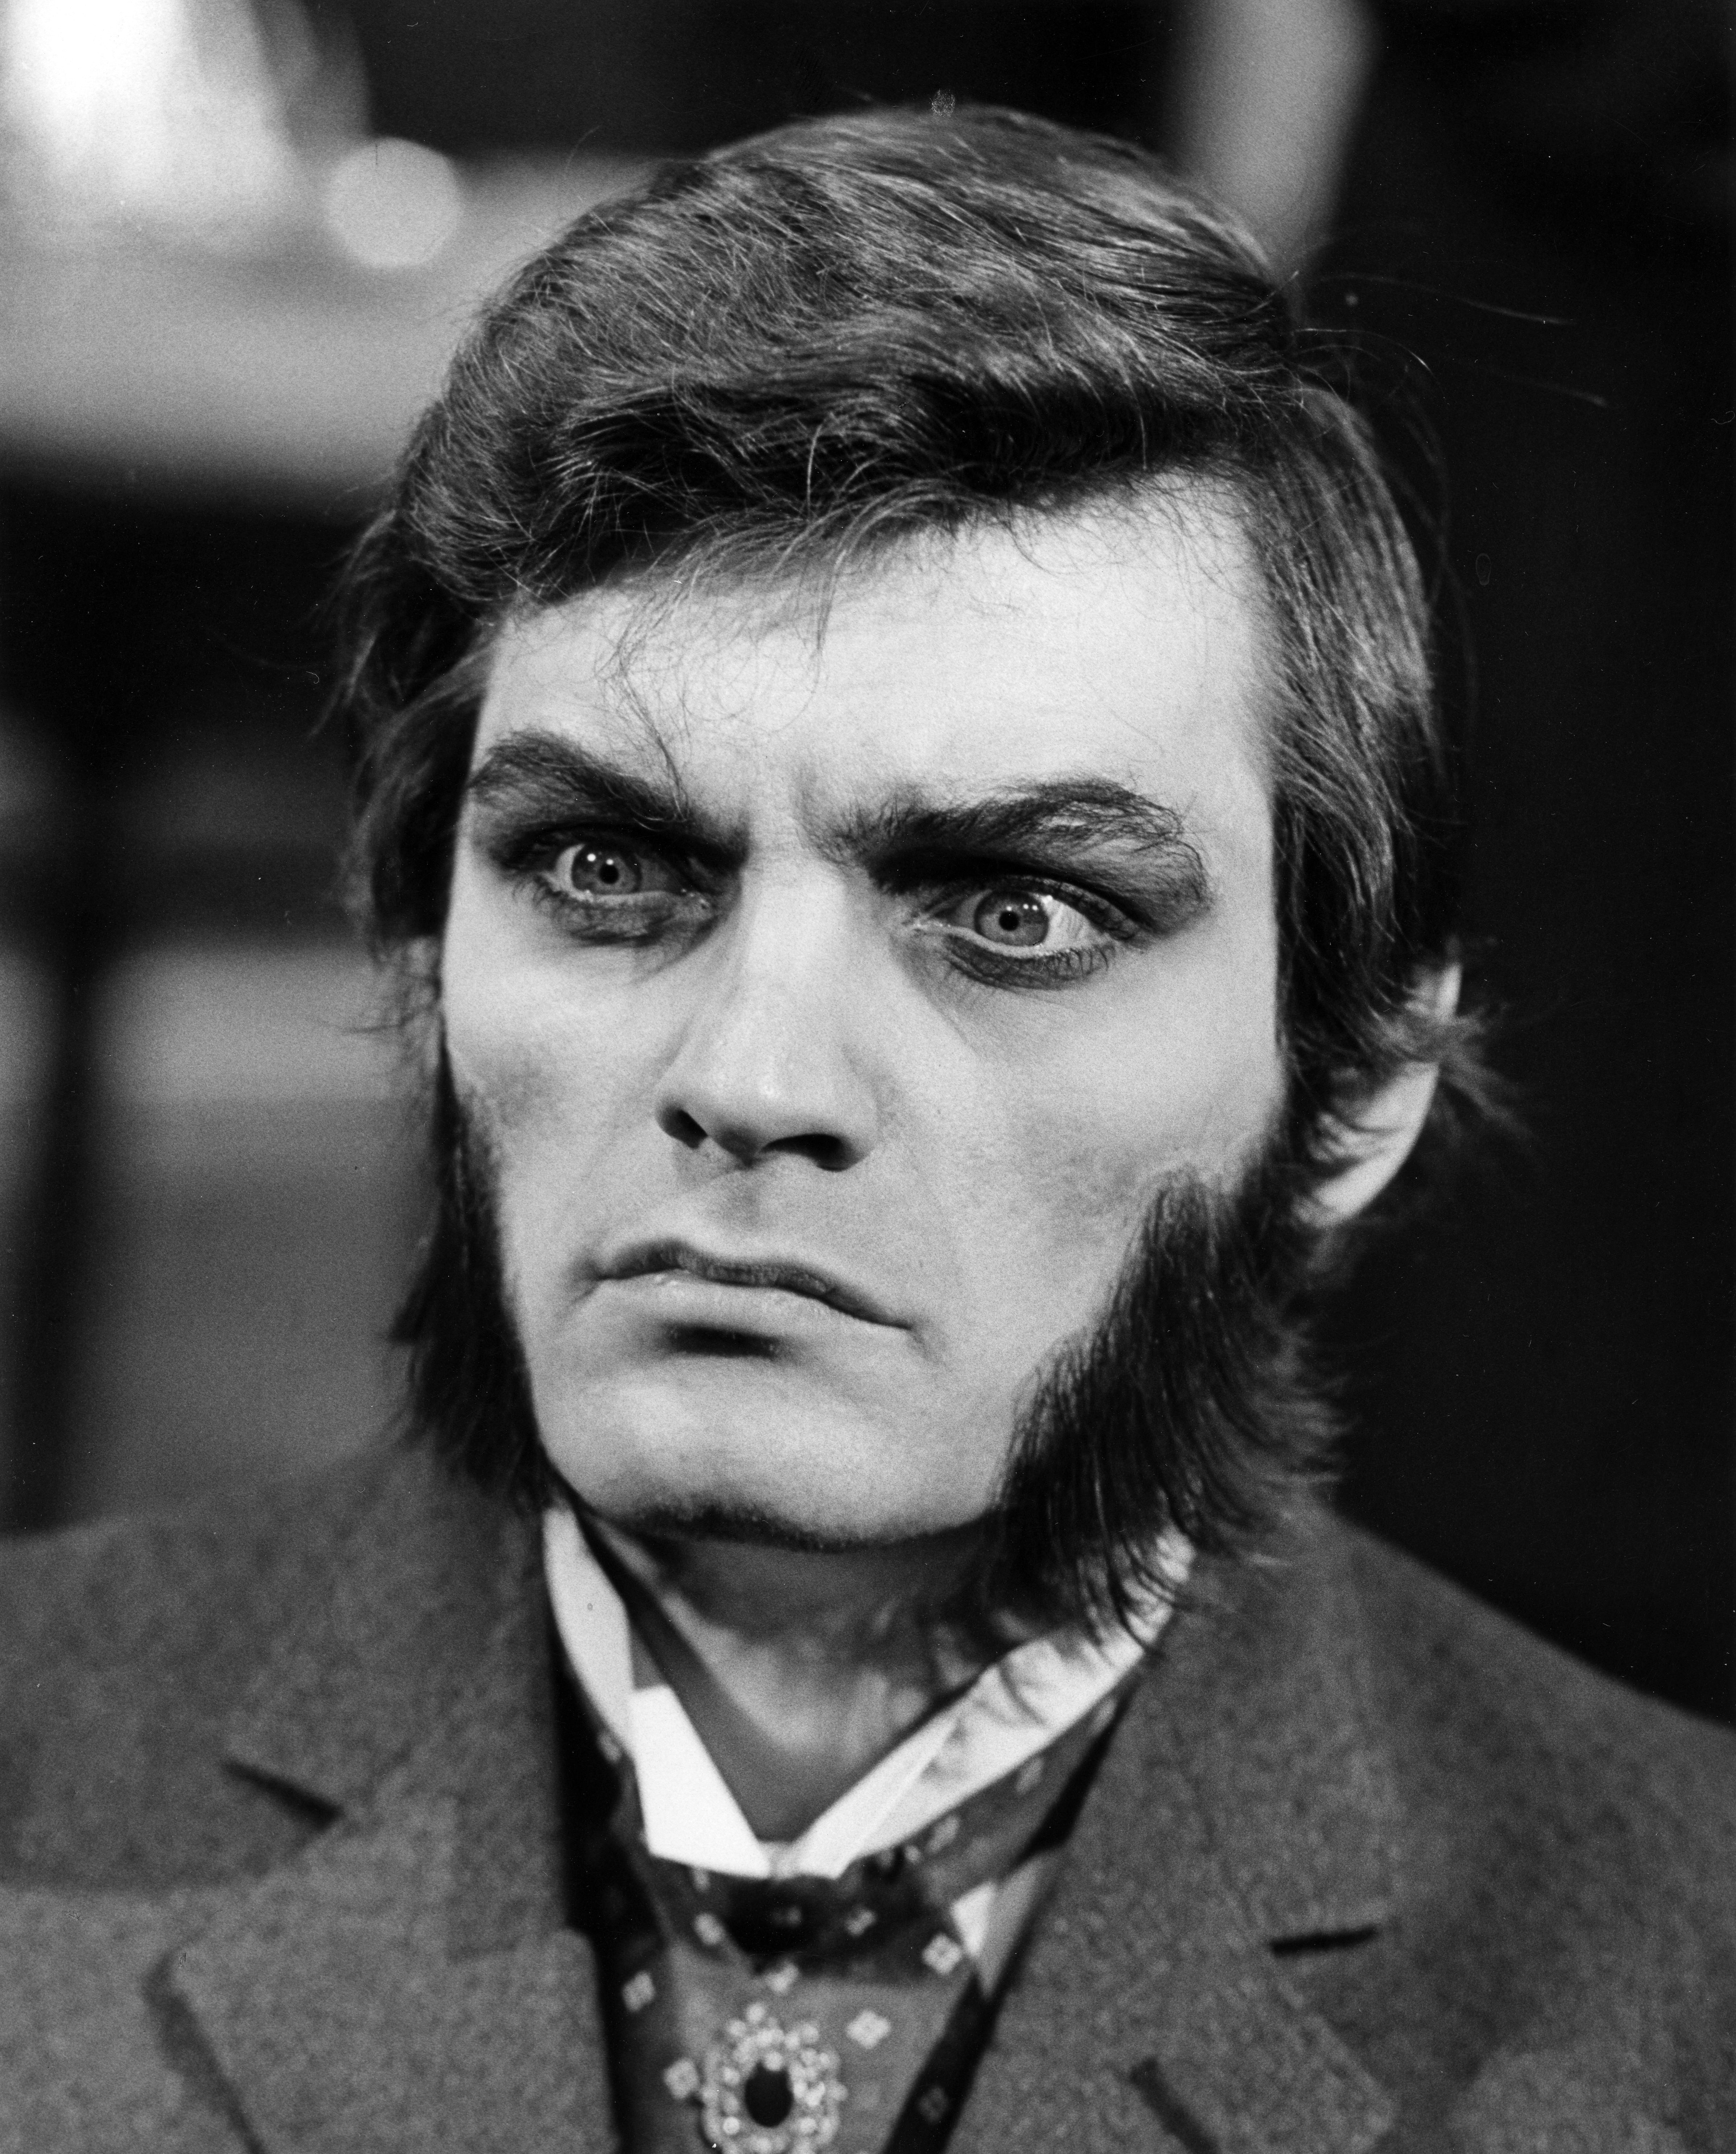 David Selby on "Dark Shadows" in 1970 | Source: Getty Images